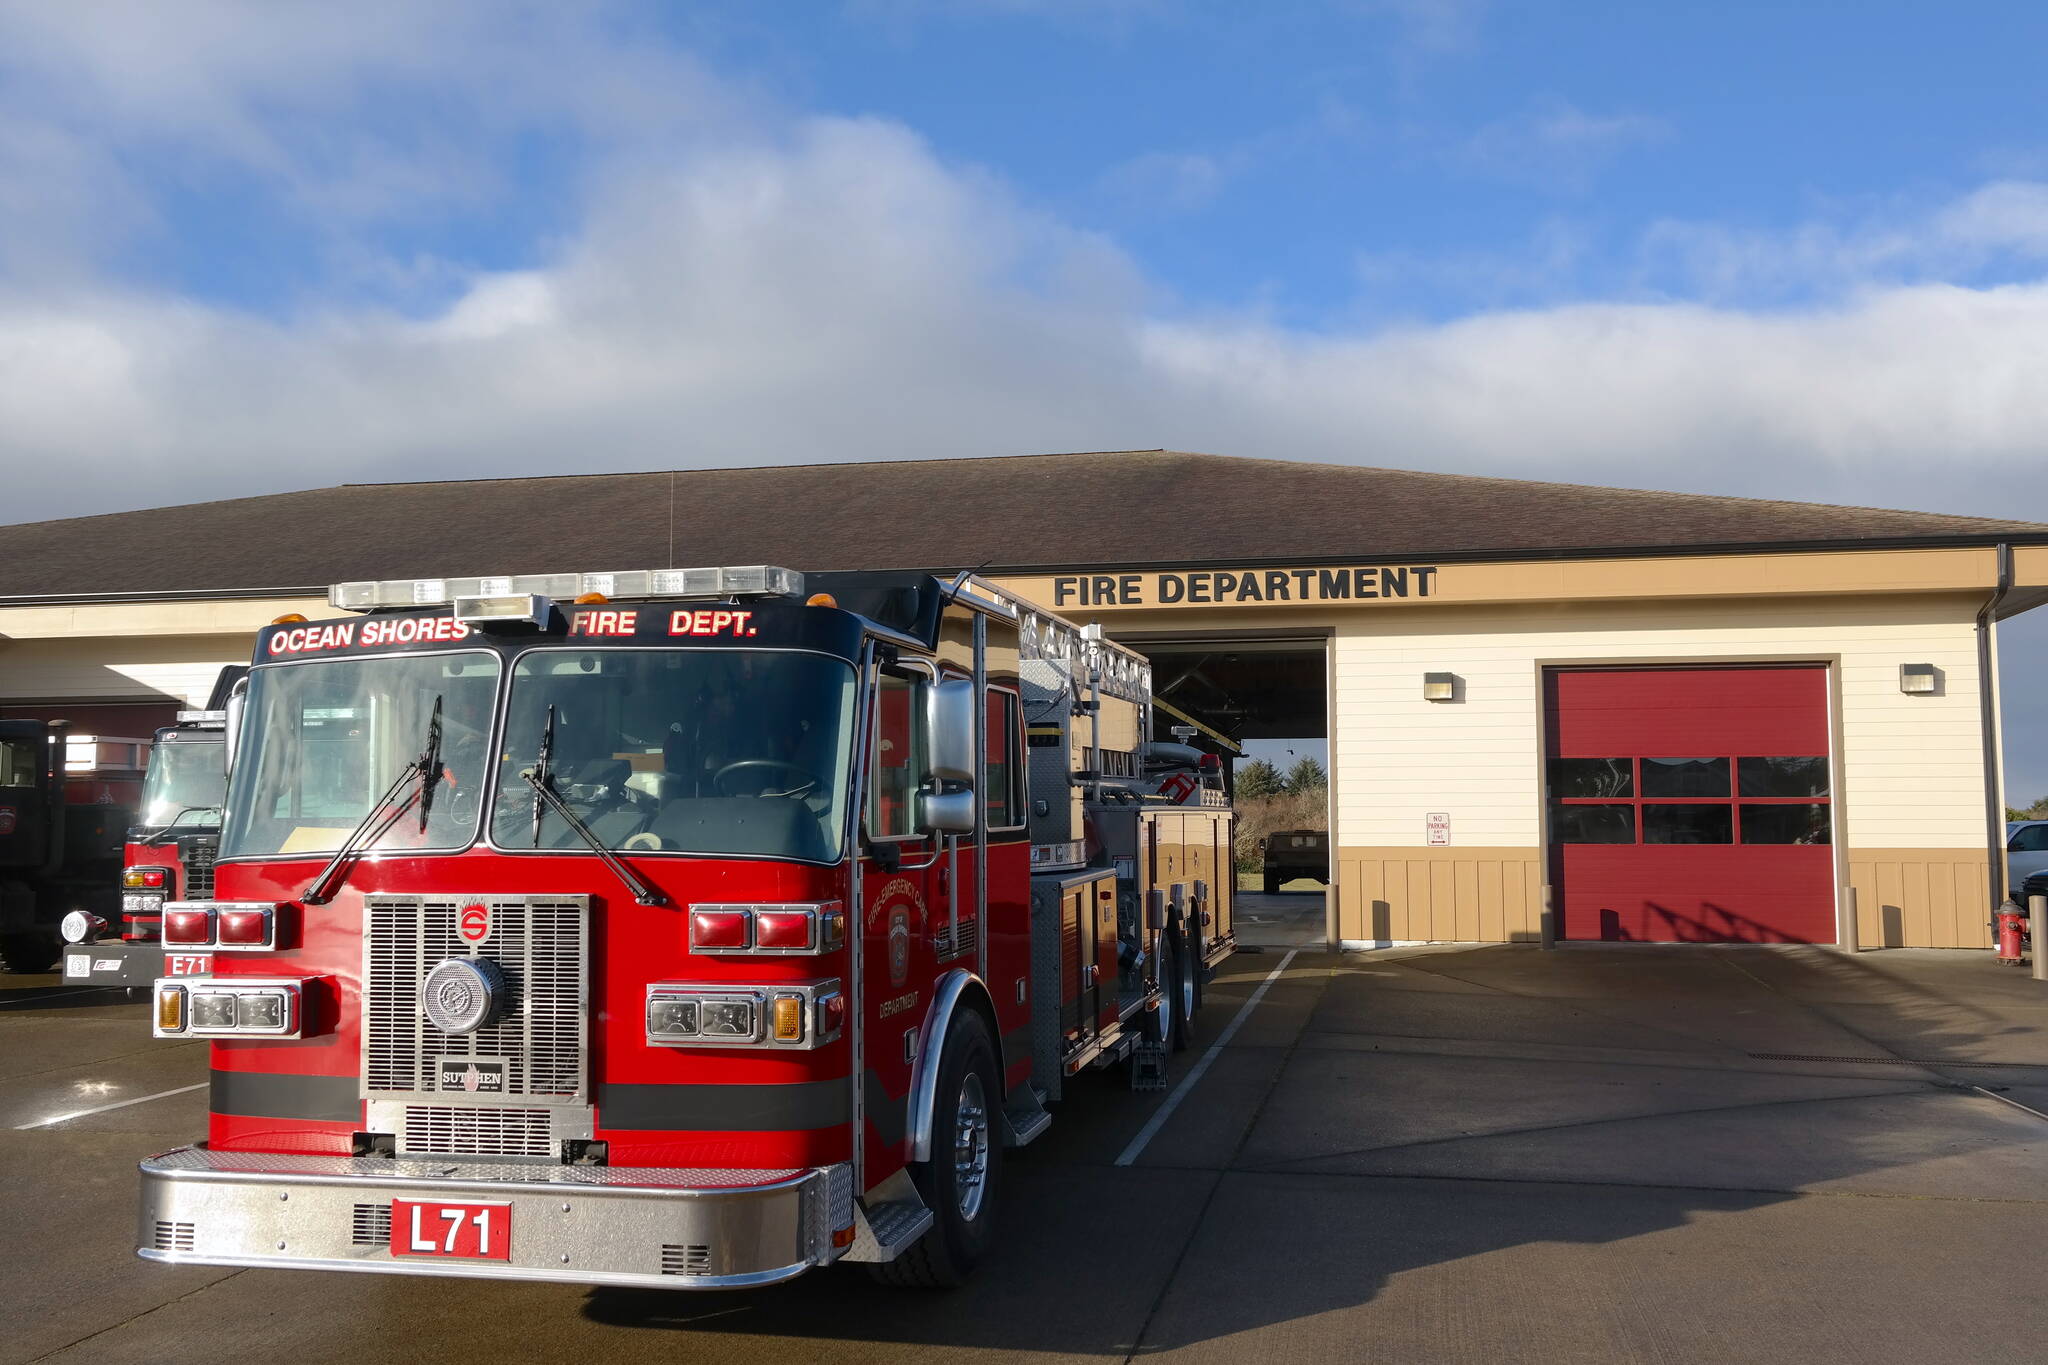 Erika Gebhardt I The Daily World 
After a request from Fire Chief Mike Thuirer, an additional firefighter/paramedic was hired in March 2021. The council also unanimously approved the inclusion of one additional FTE firefighter for 2022.